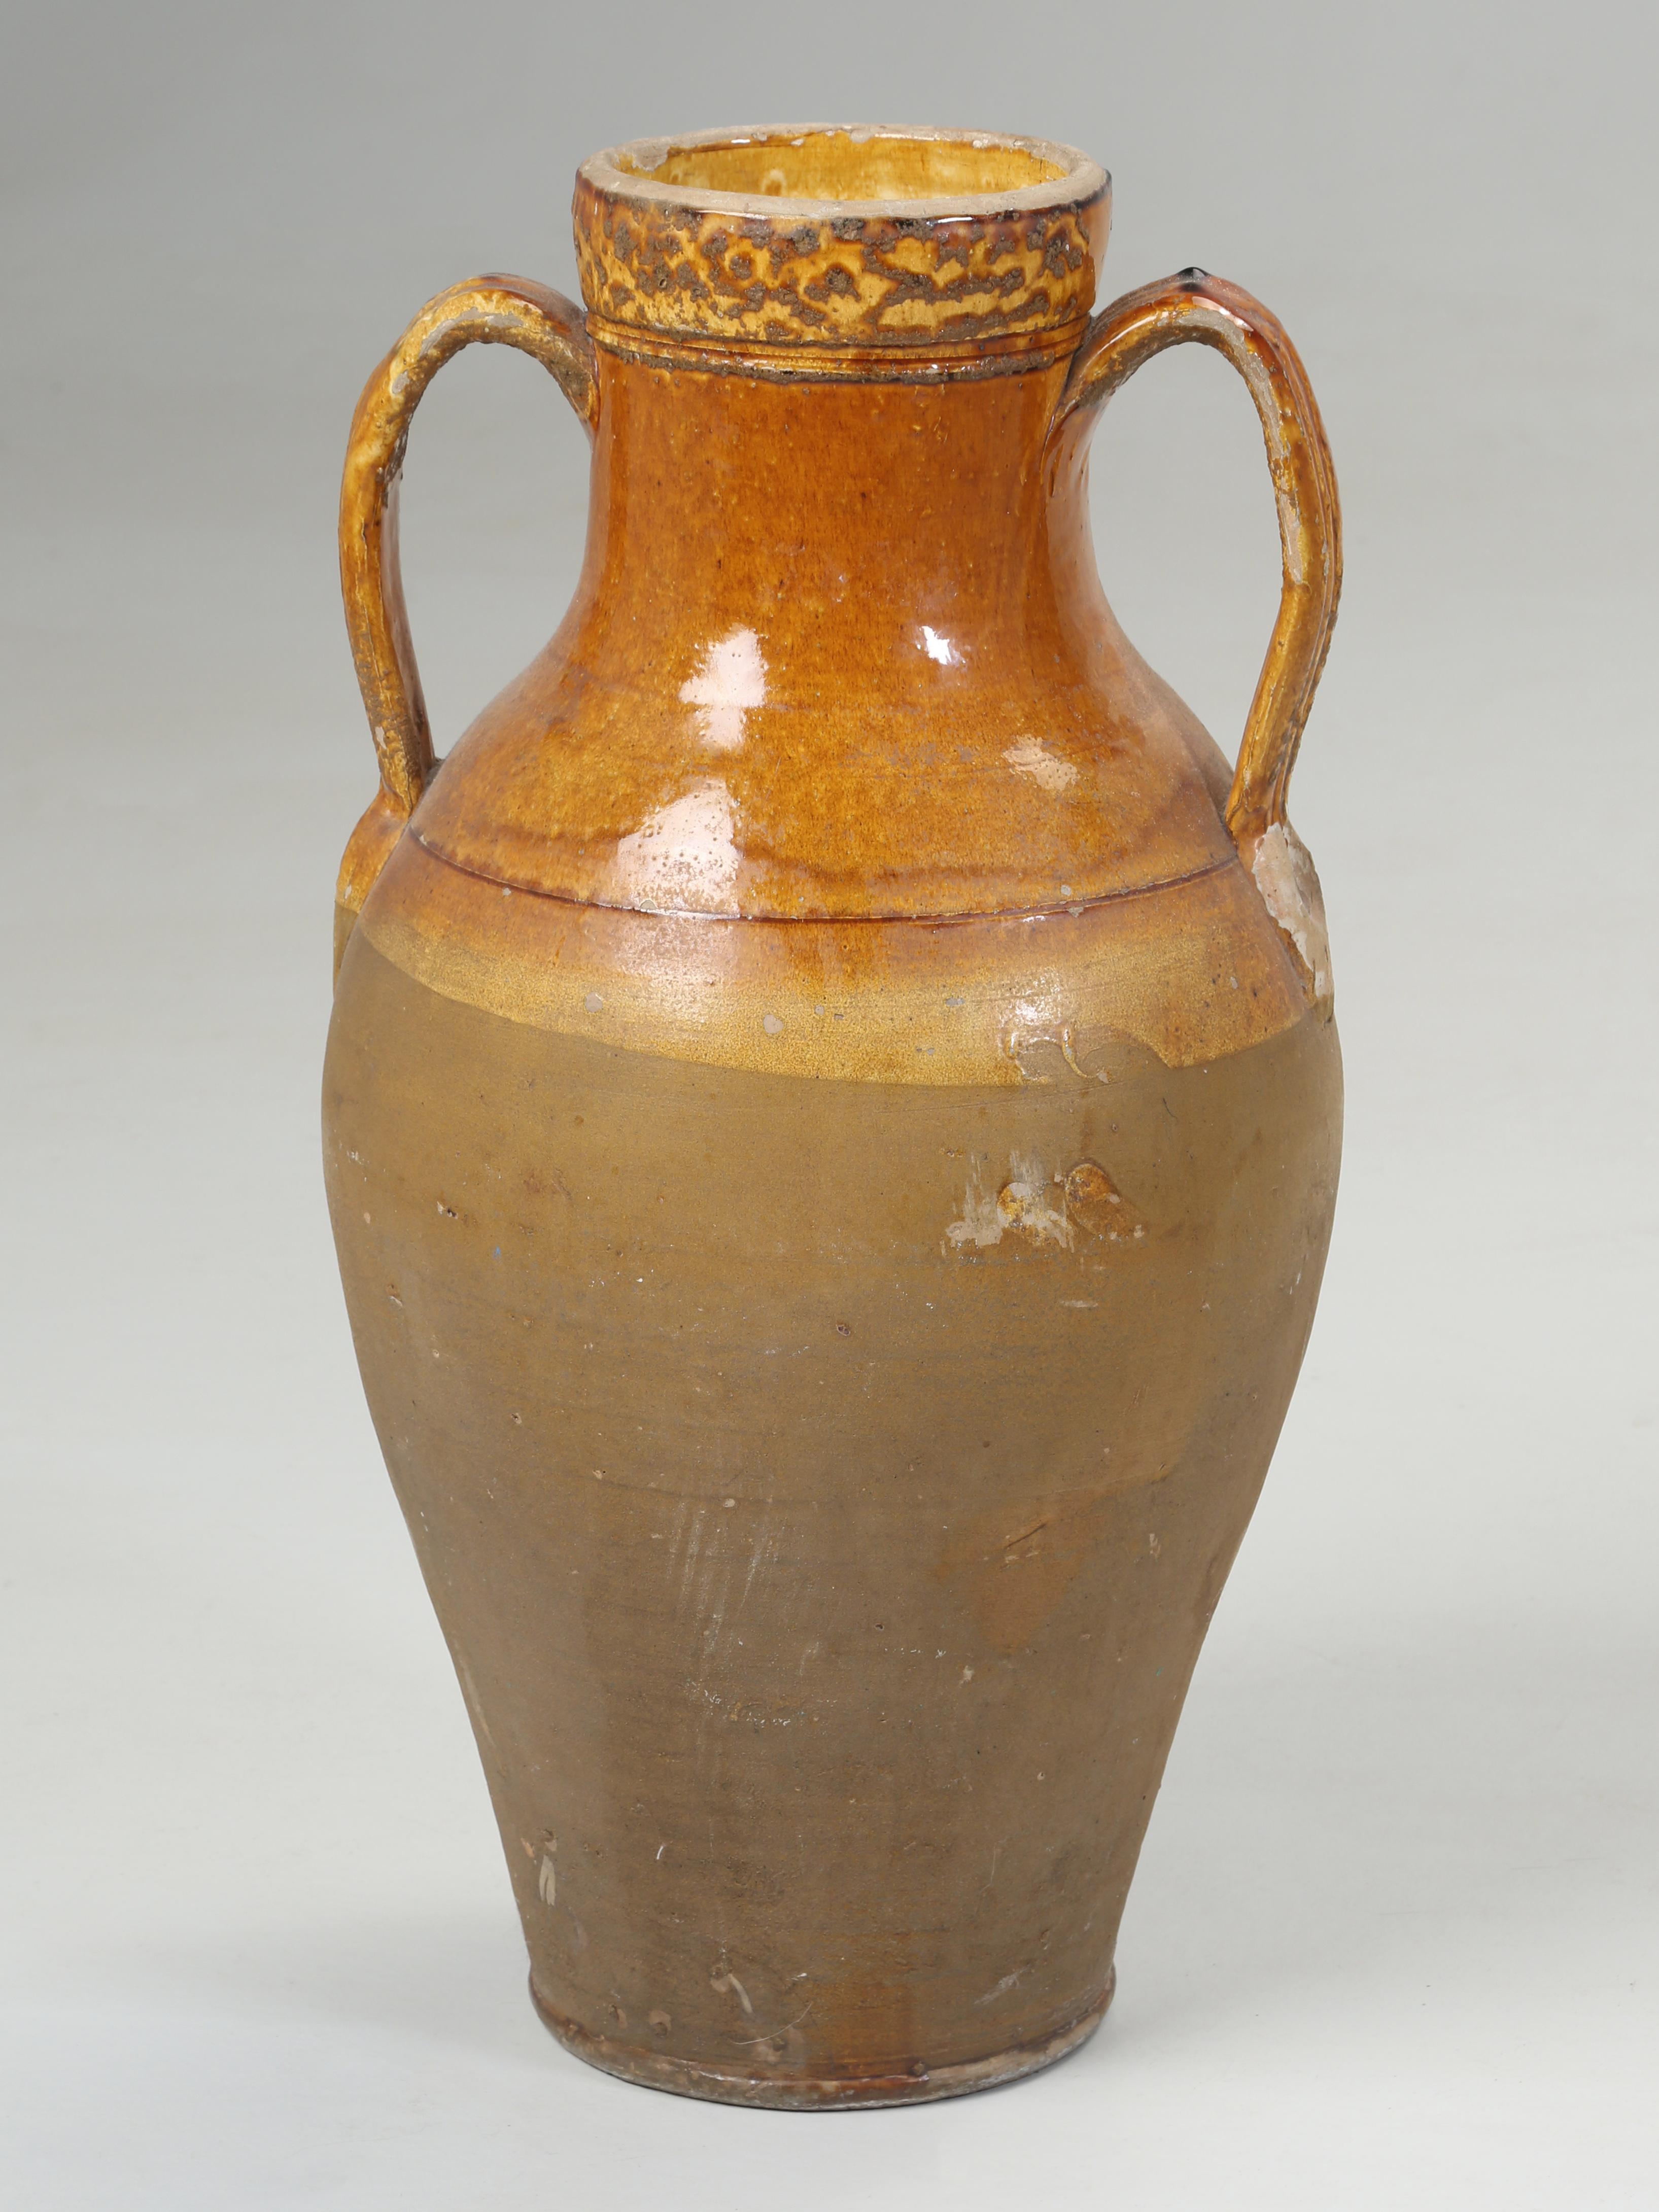 In the trade, we commonly call these an Olive Oil Jar, but are actually an amphora, which is a type of container of a specific shape and dimension, which began in the Neolithic Period, which ran from approximately 9000BC to 3500BC. Amphorae vessels